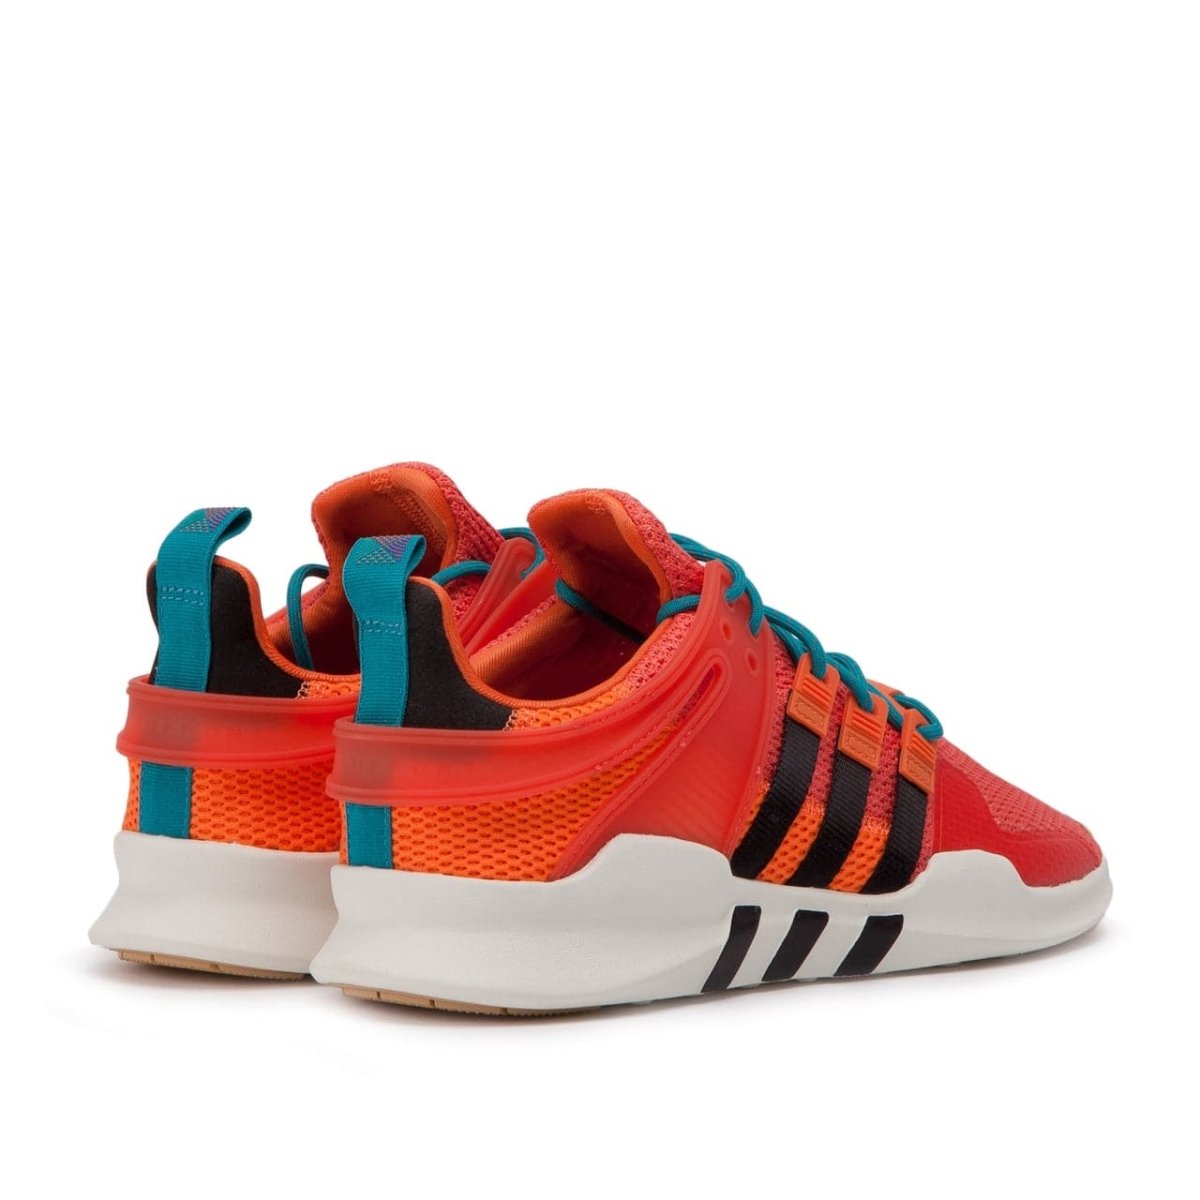 adidas EQT Support Summer 'Atric' – Allike Store